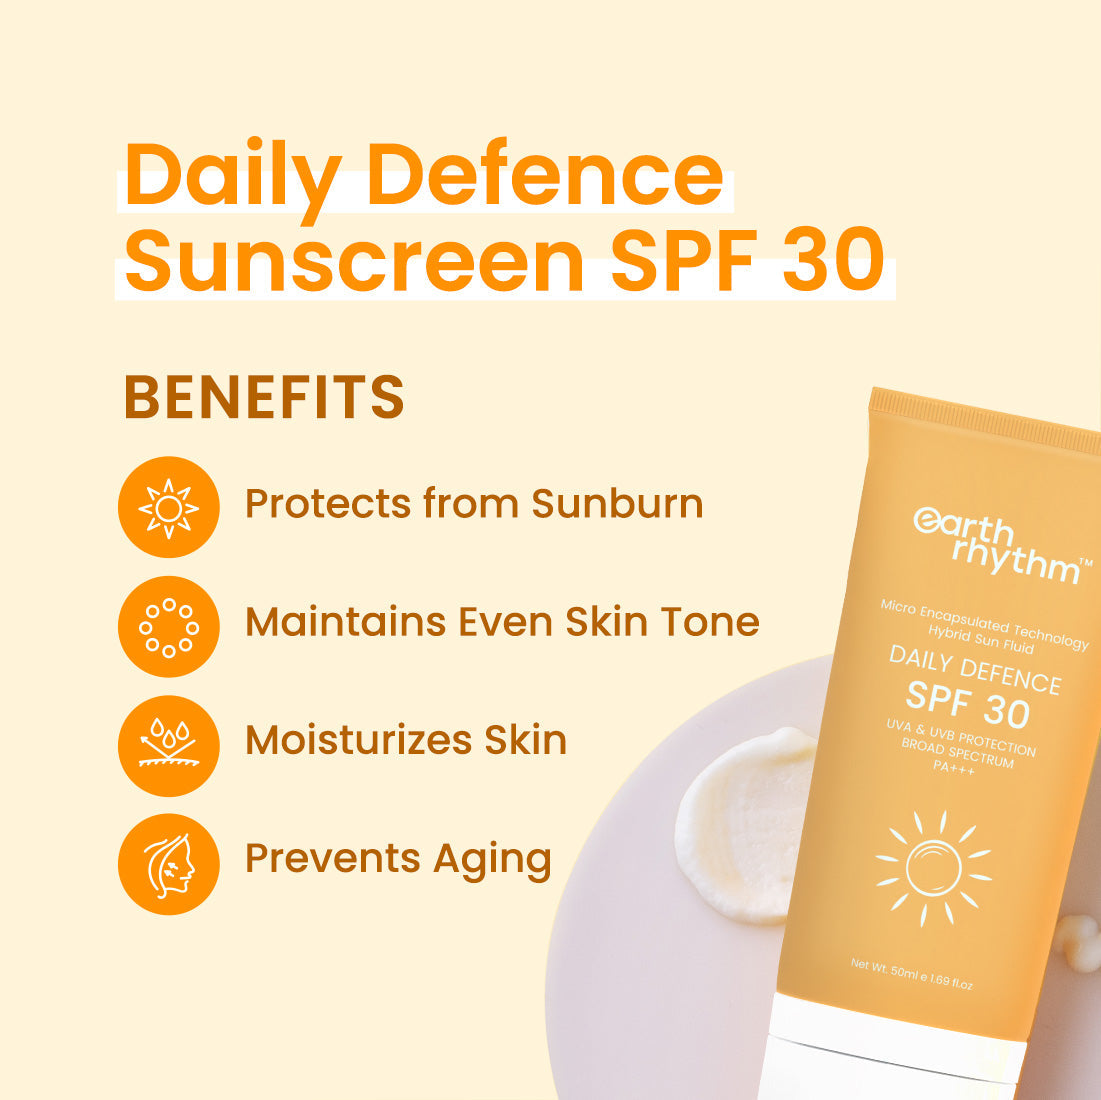 daily defence spf 30 sunscreen benefits